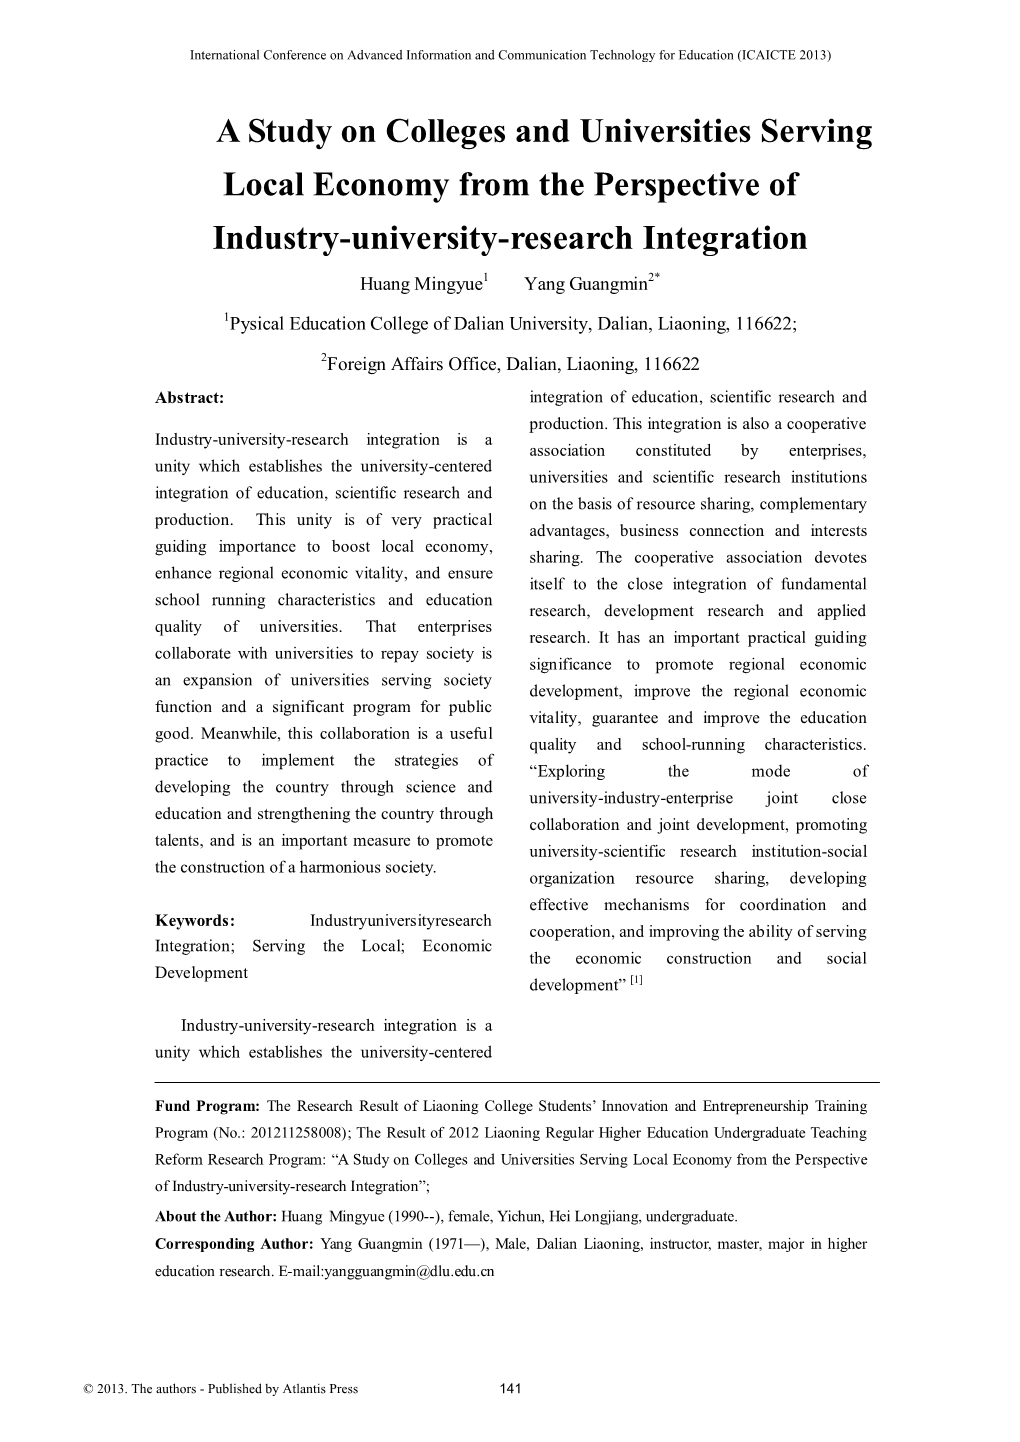 A Study on Colleges and Universities Serving Local Economy from the Perspective of Industry-University-Research Integration Huang Mingyue1 Yang Guangmin2*